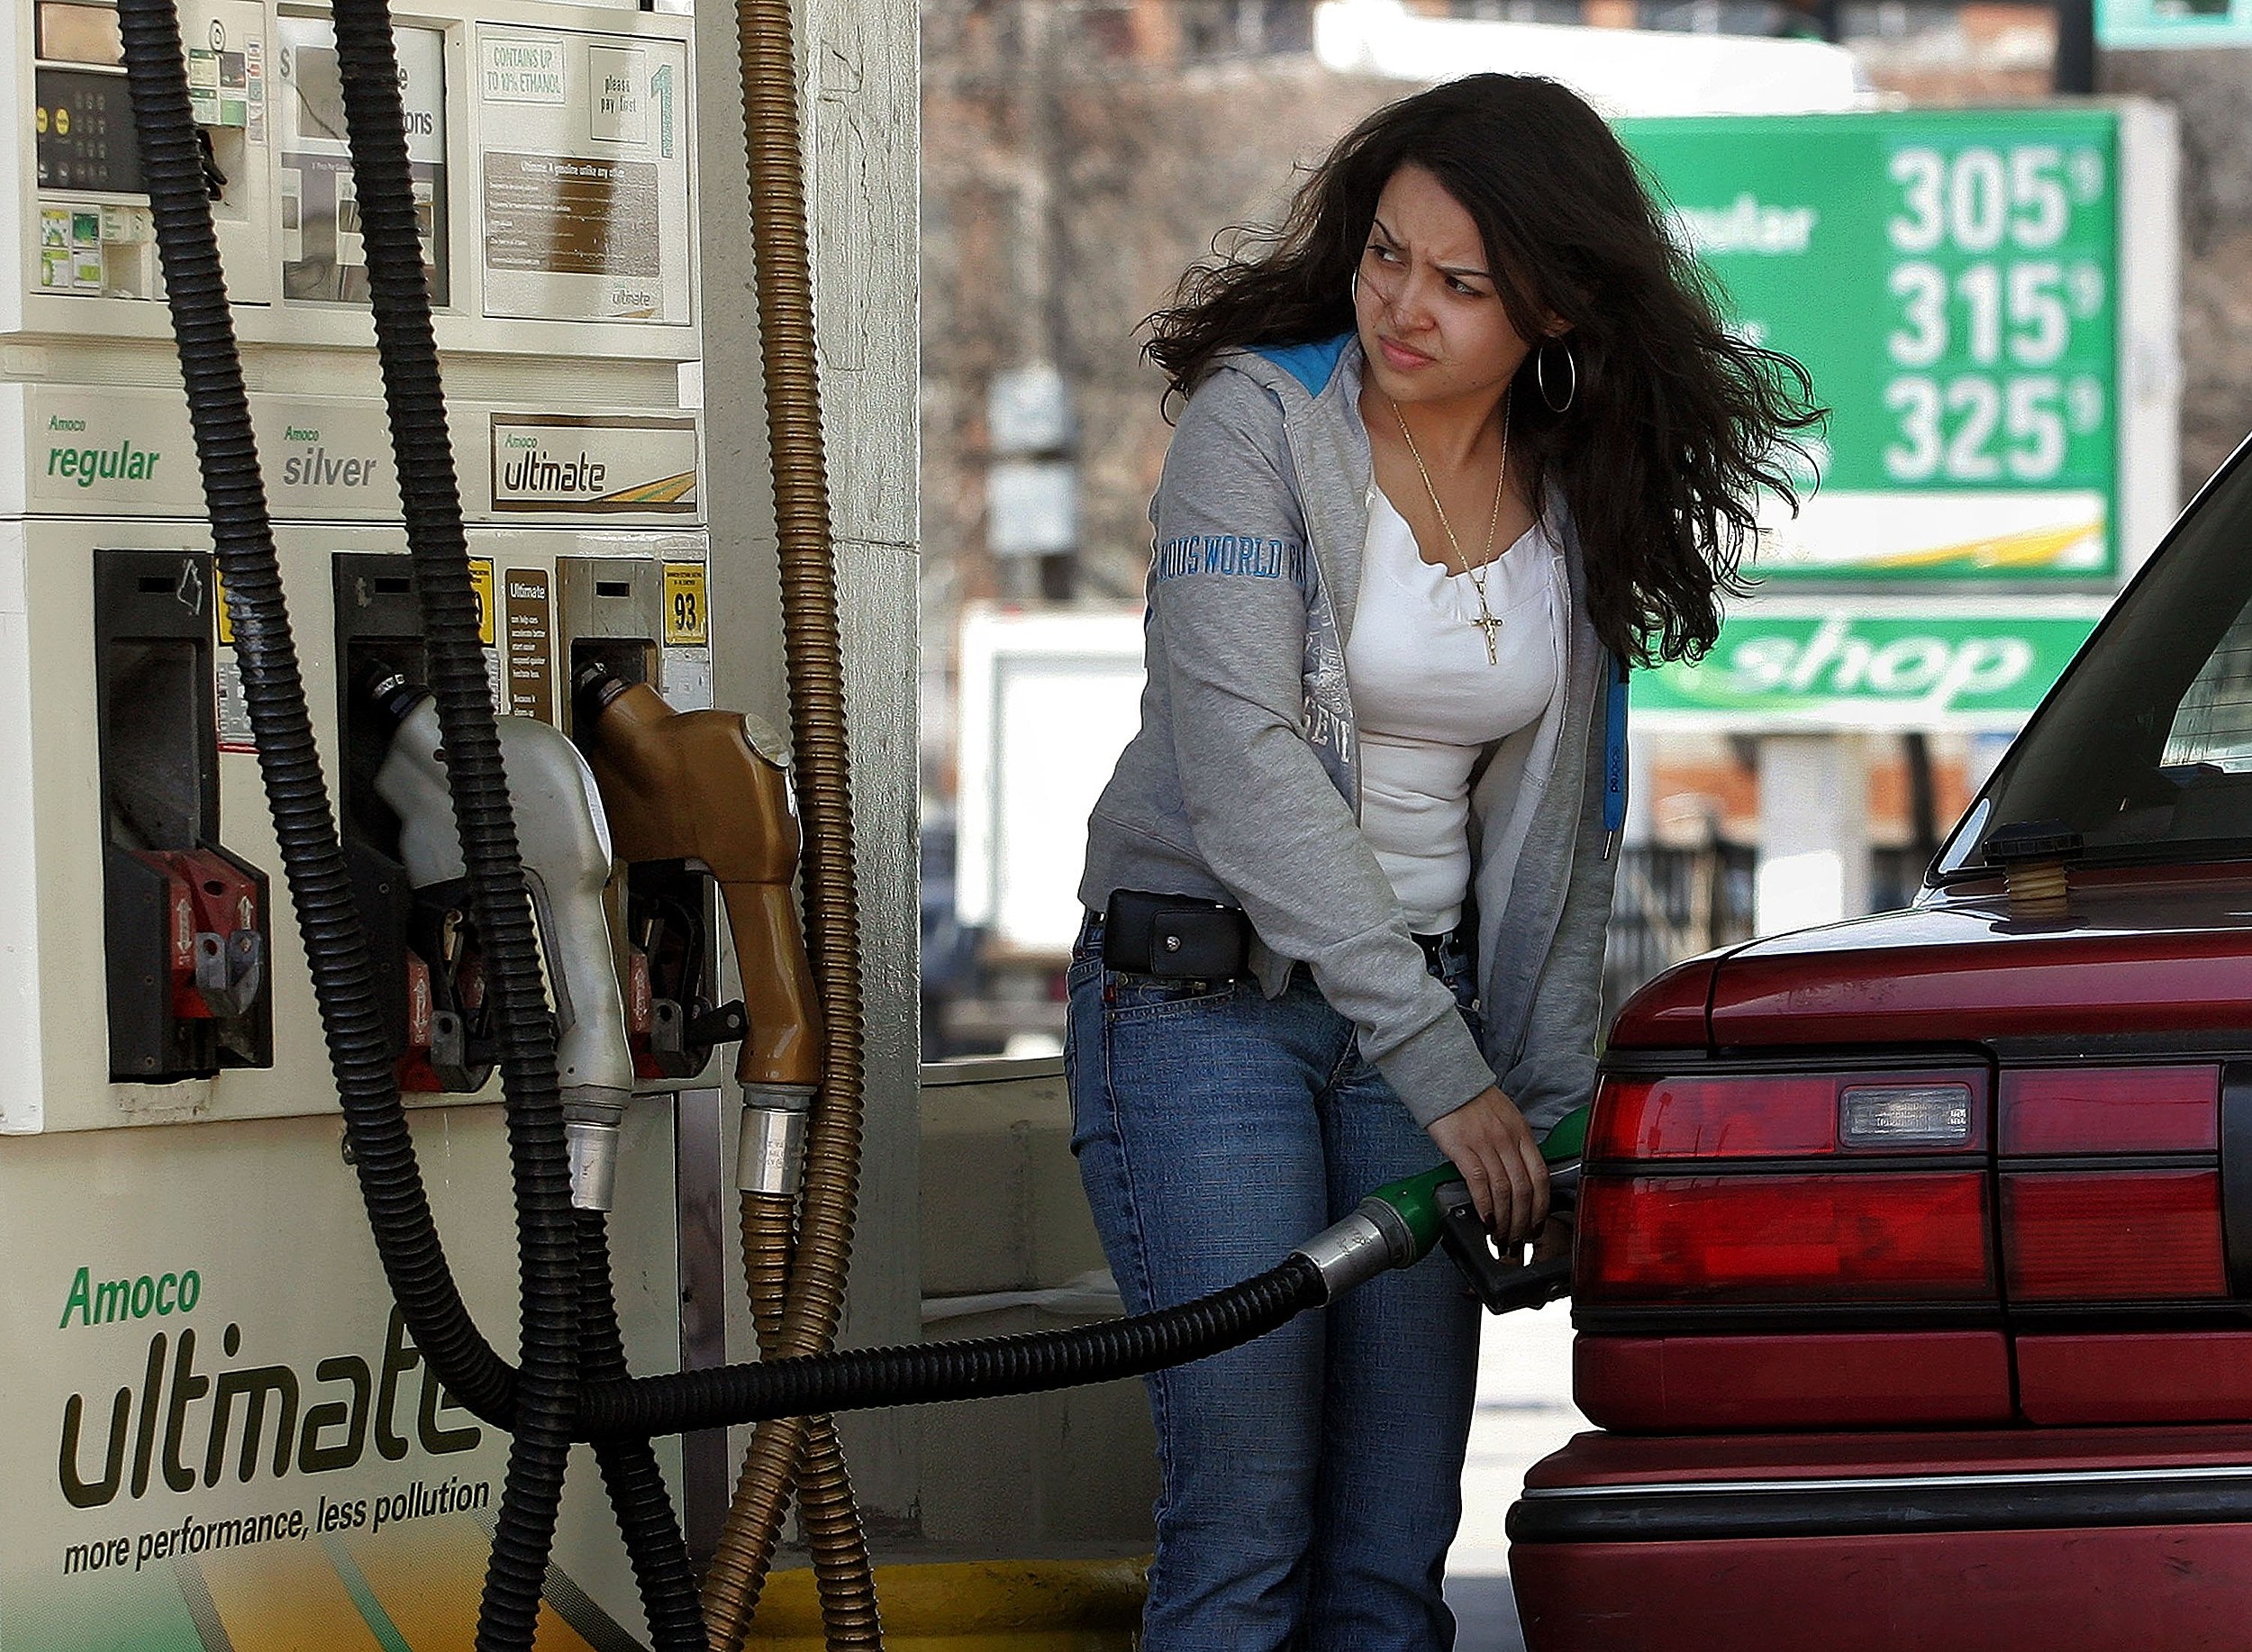 Will real New Jersey girls go for pumping their own gas?